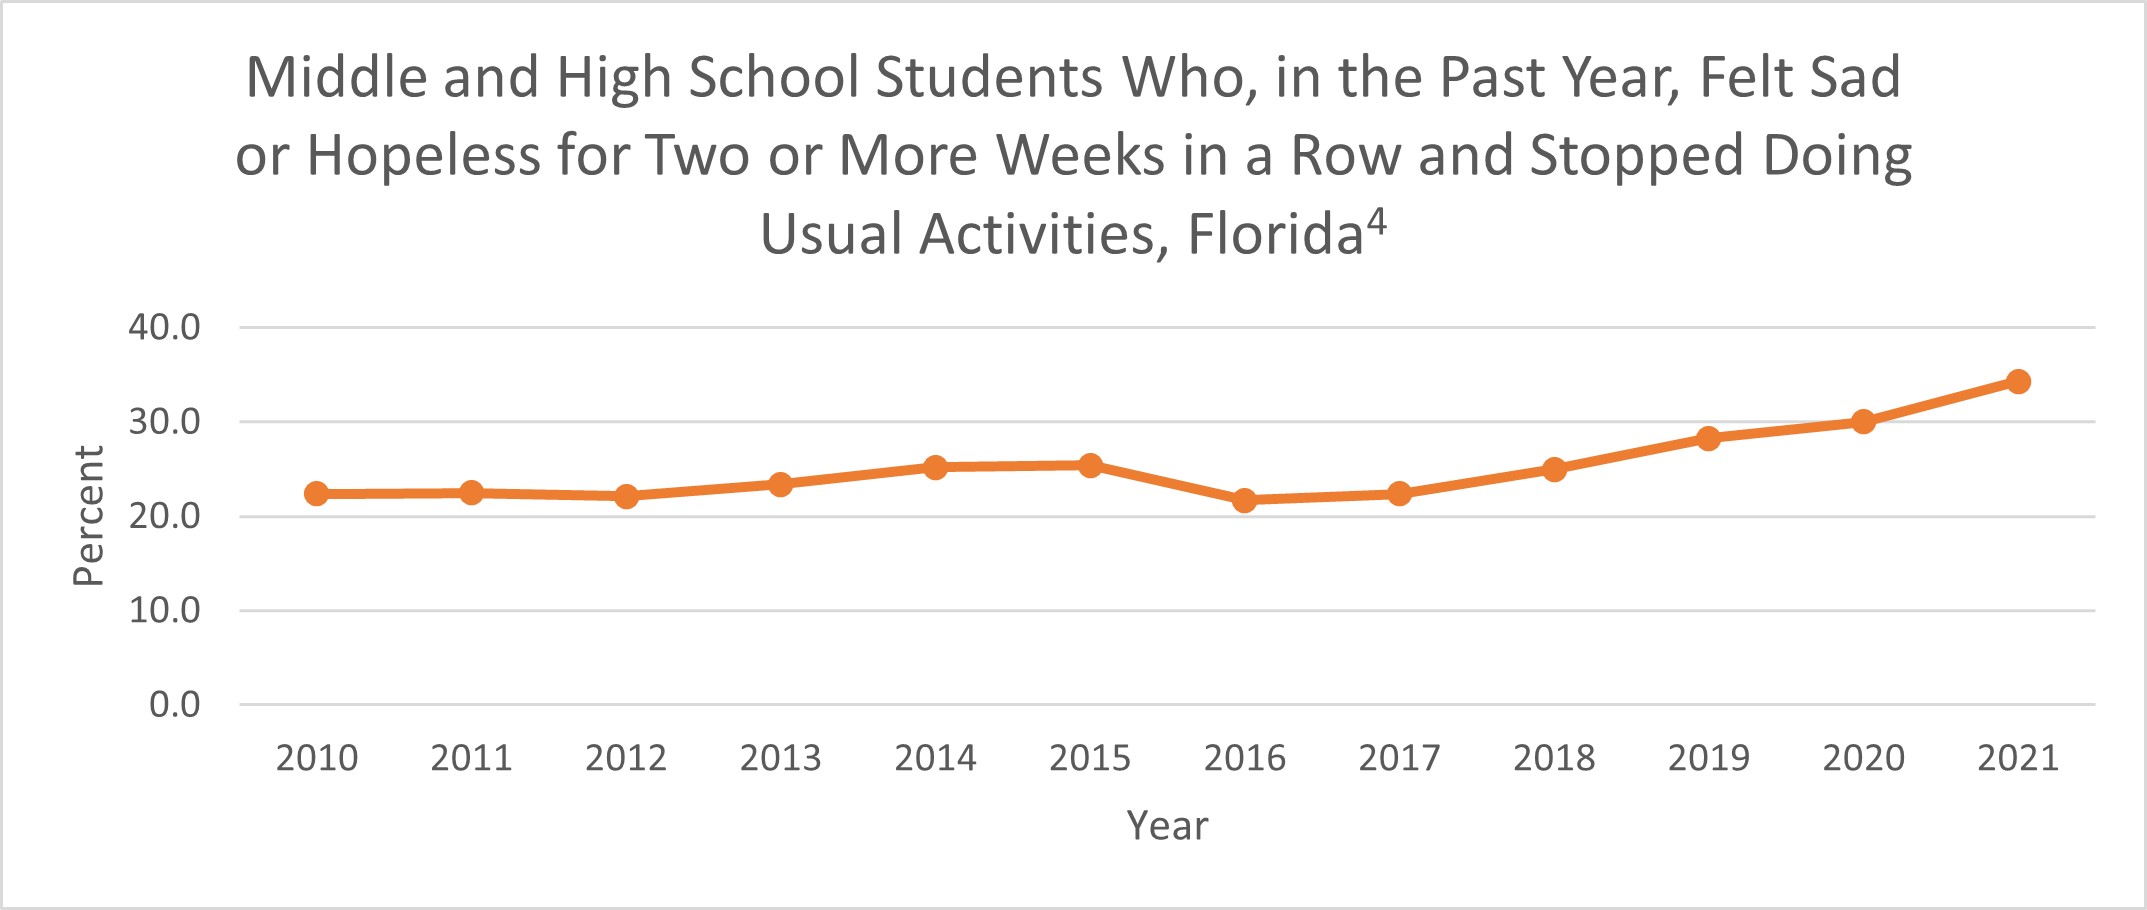 Middle and High School Students Who, in the Past Year, Felt Sad or Hopeless for Two or More Weeks in a Row and Stopped Doing Usual Activities, Florida